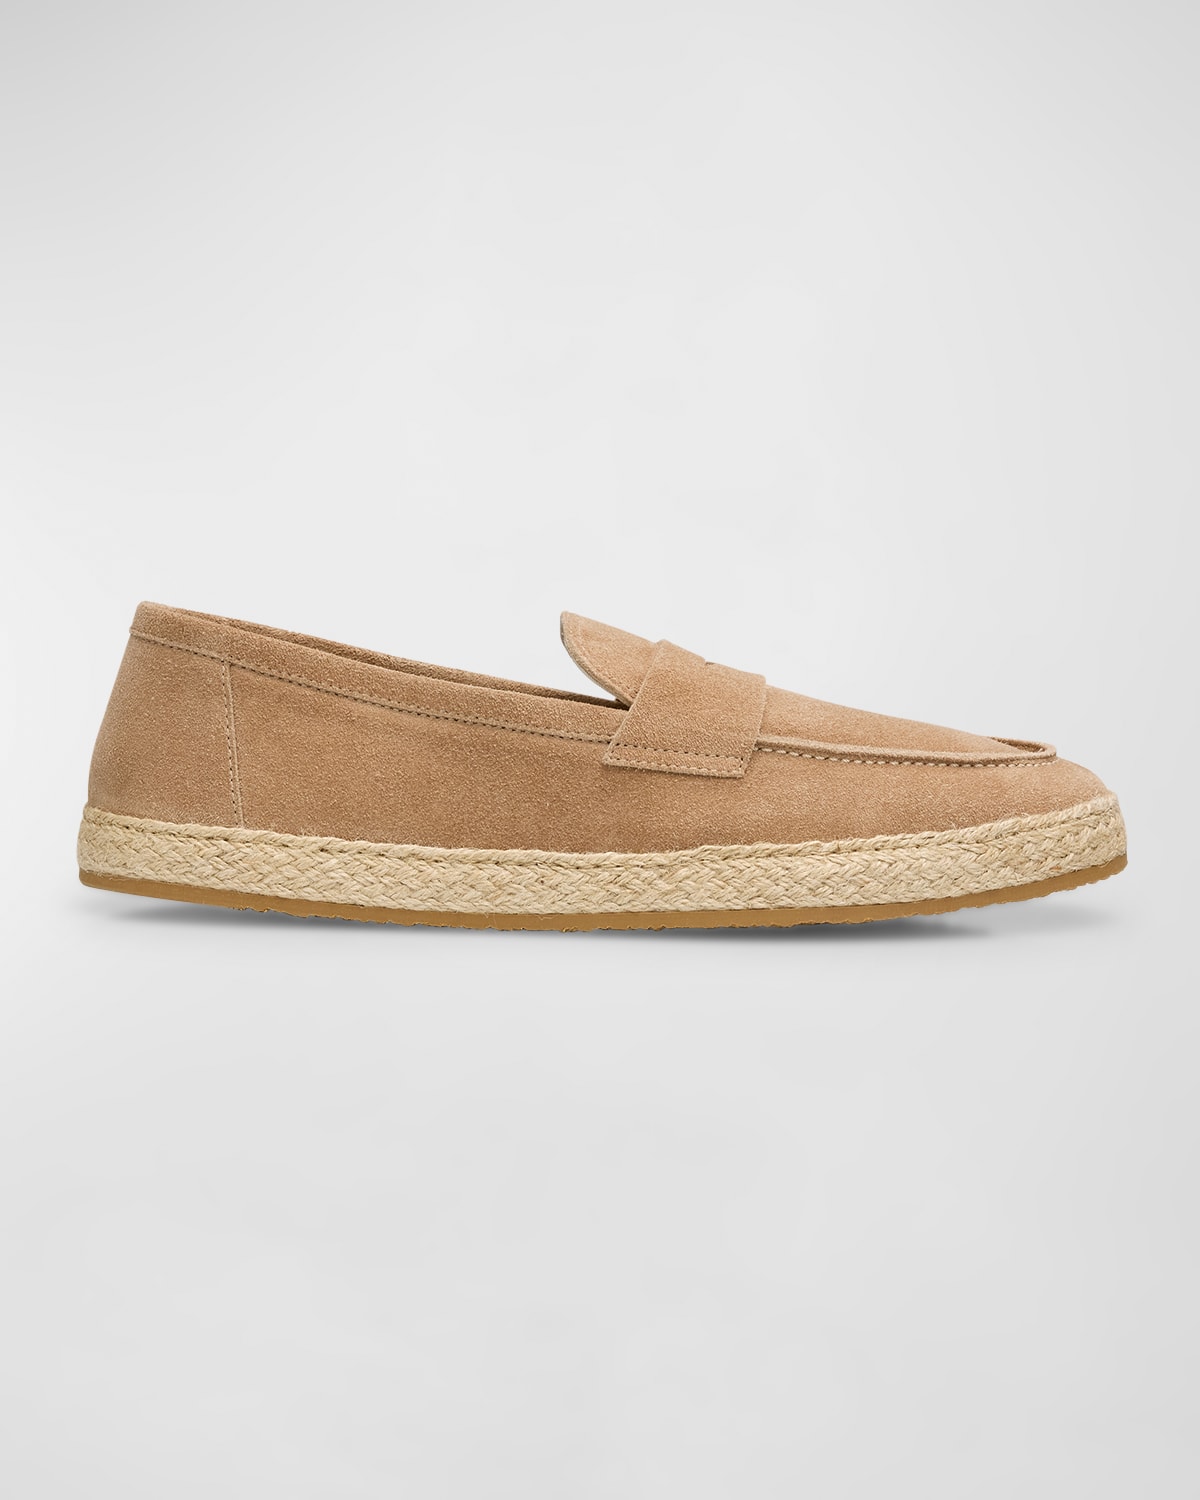 Men's Suede Espadrille Penny Loafers